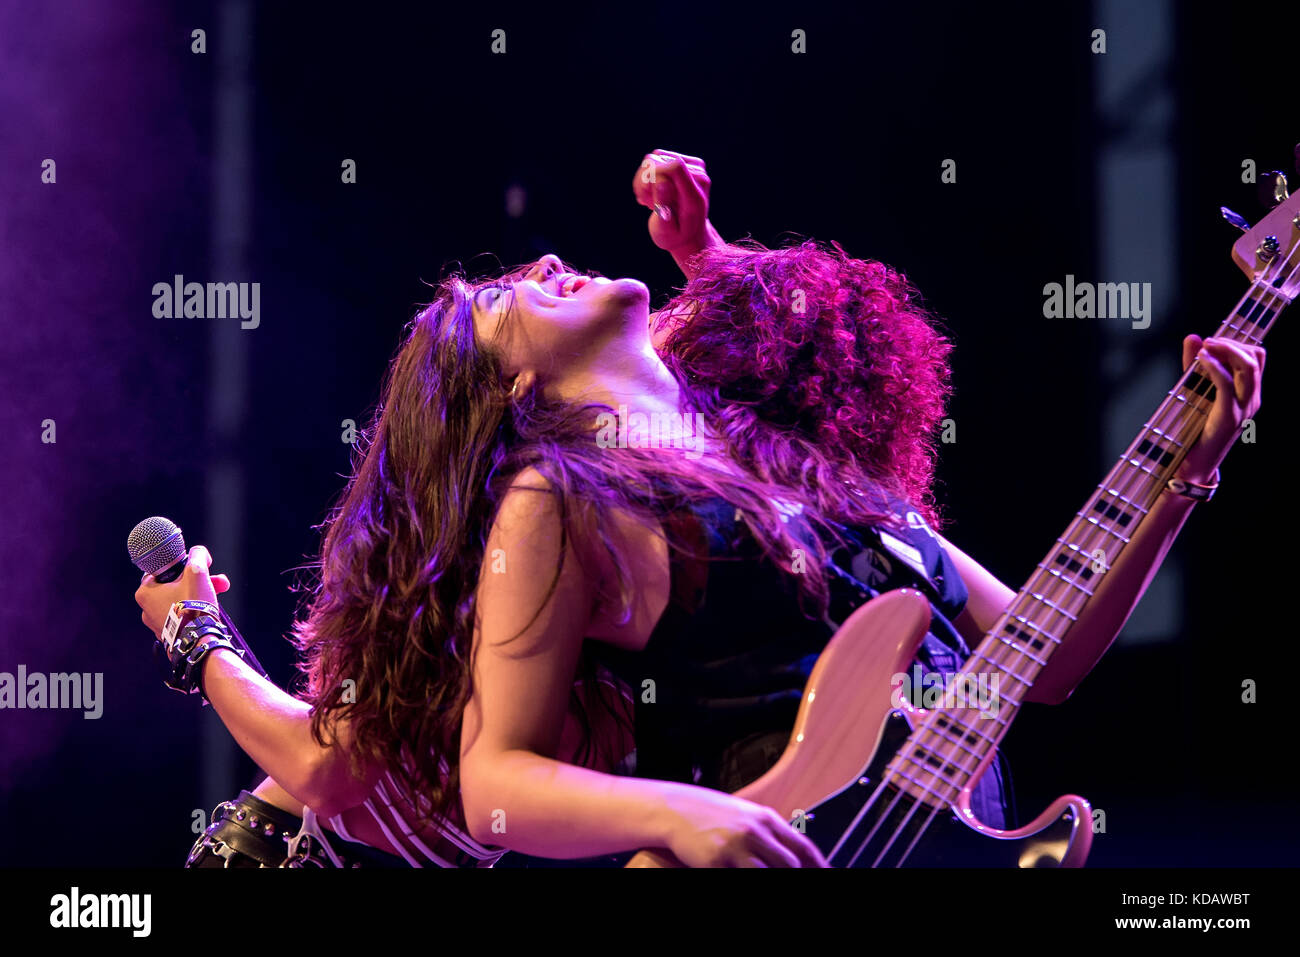 MADRID - JUN 22: Lizzies (female hard rock music band) perform in concert at Download (heavy metal music festival) on June 22, 2017 in Madrid, Spain. Stock Photo